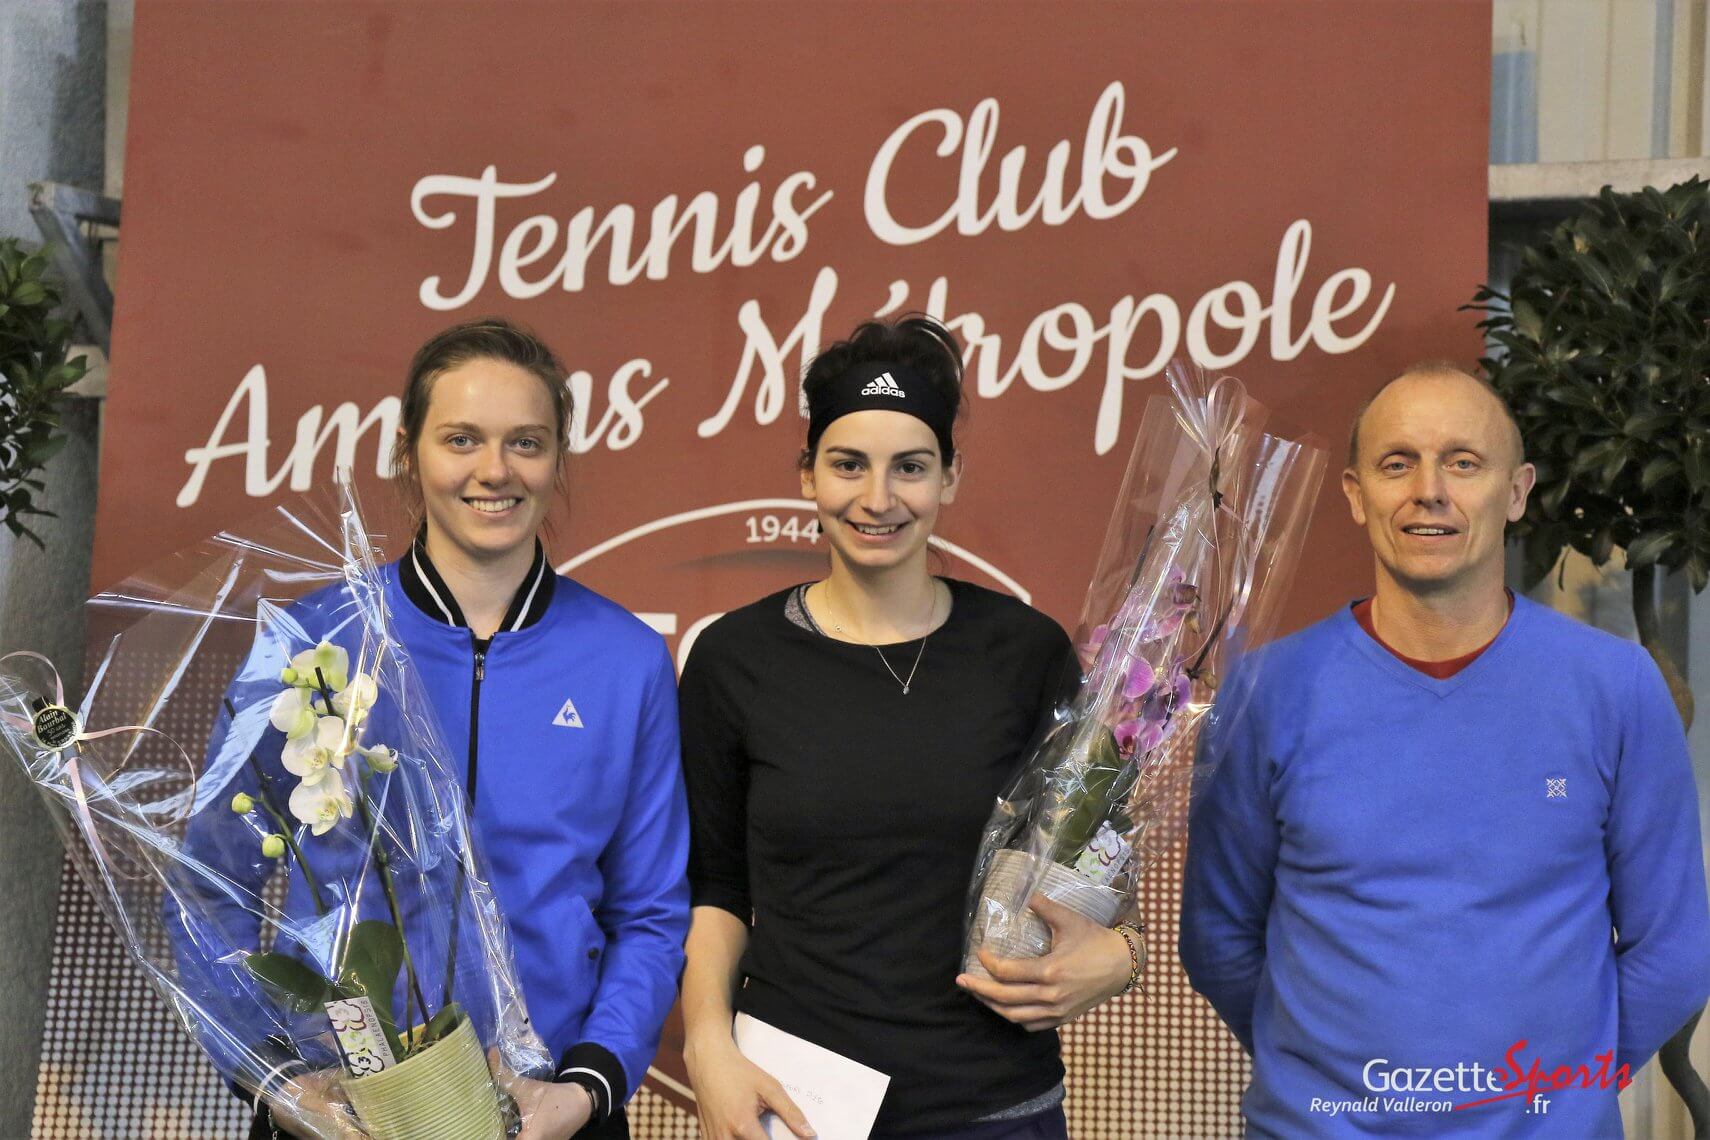 Landtsheere / Destombes and Fontaine / Boitier win the Open TCAM